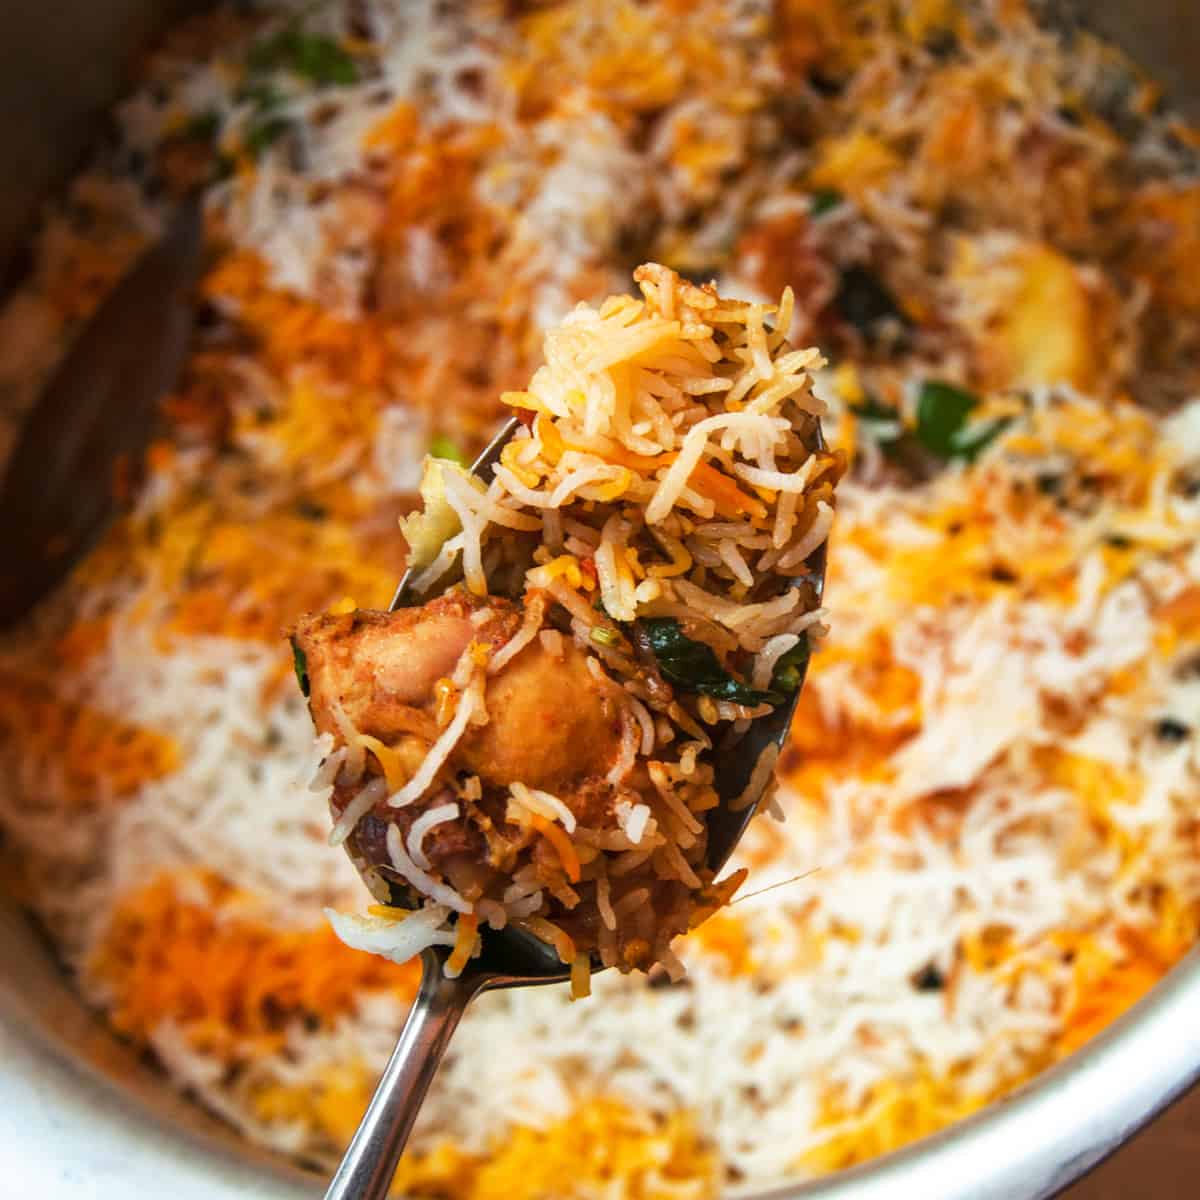 A close of spoon filled with biryani.